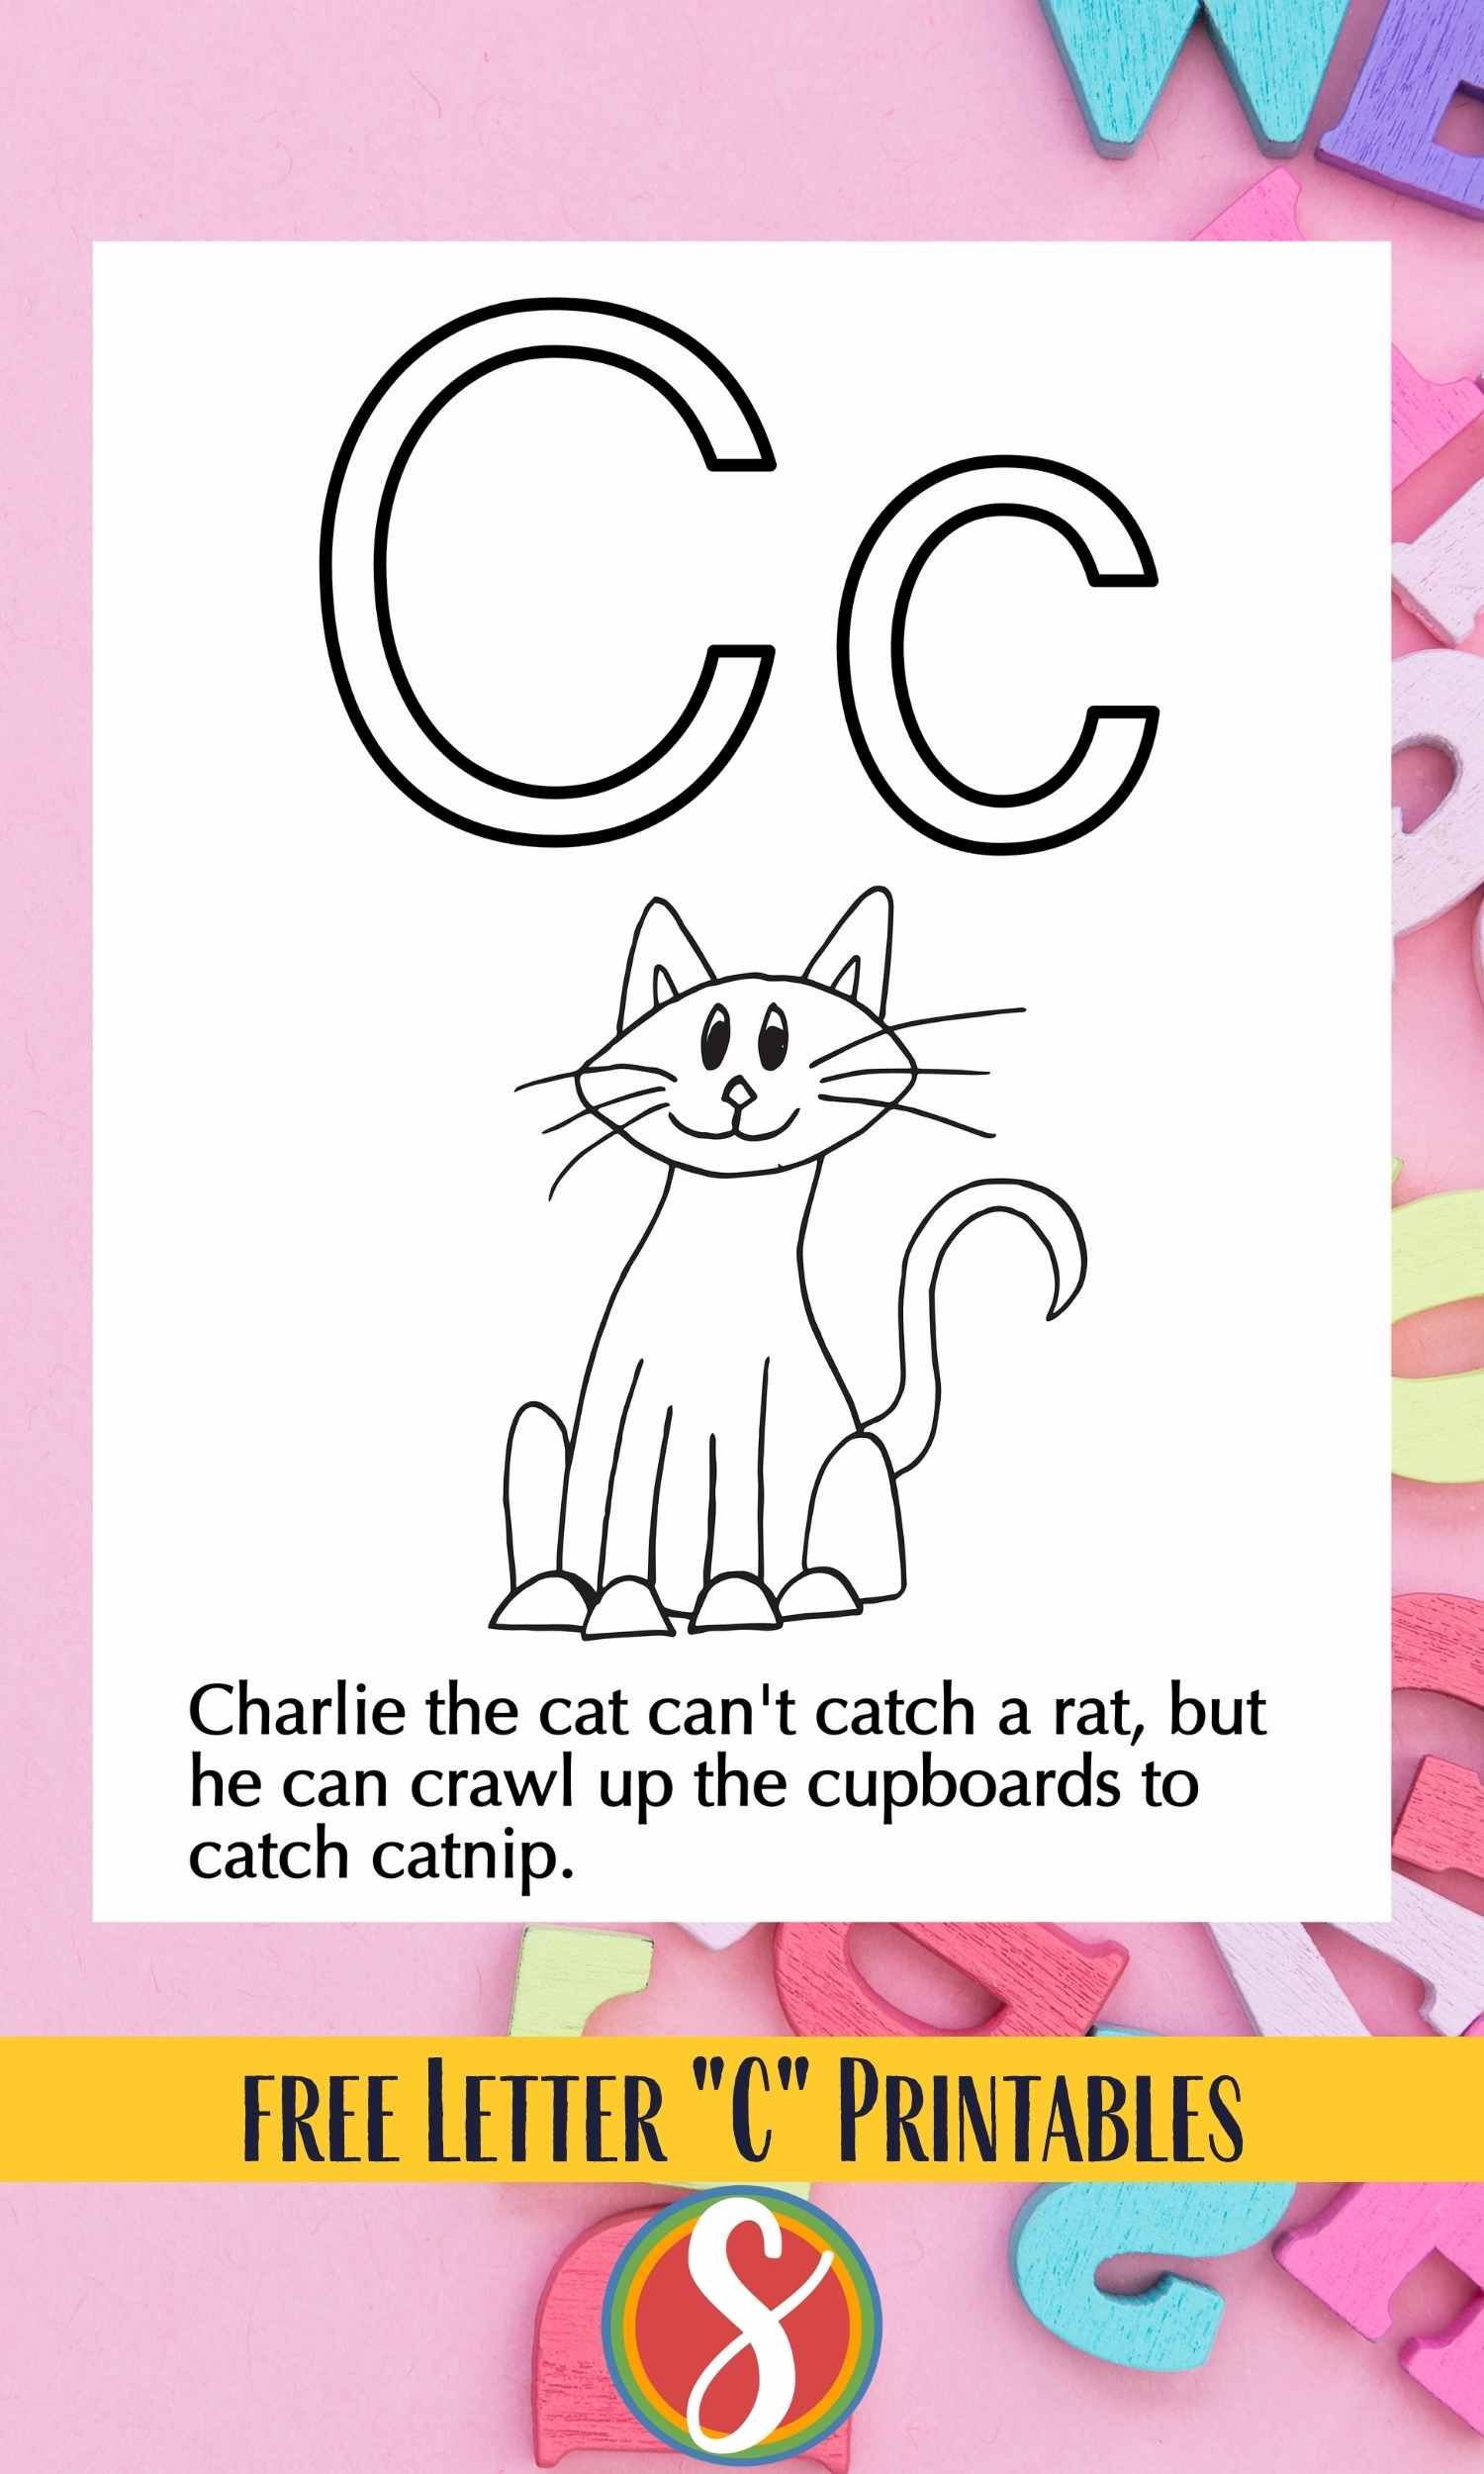 one large cat to color and a silly sentence full of "C" words